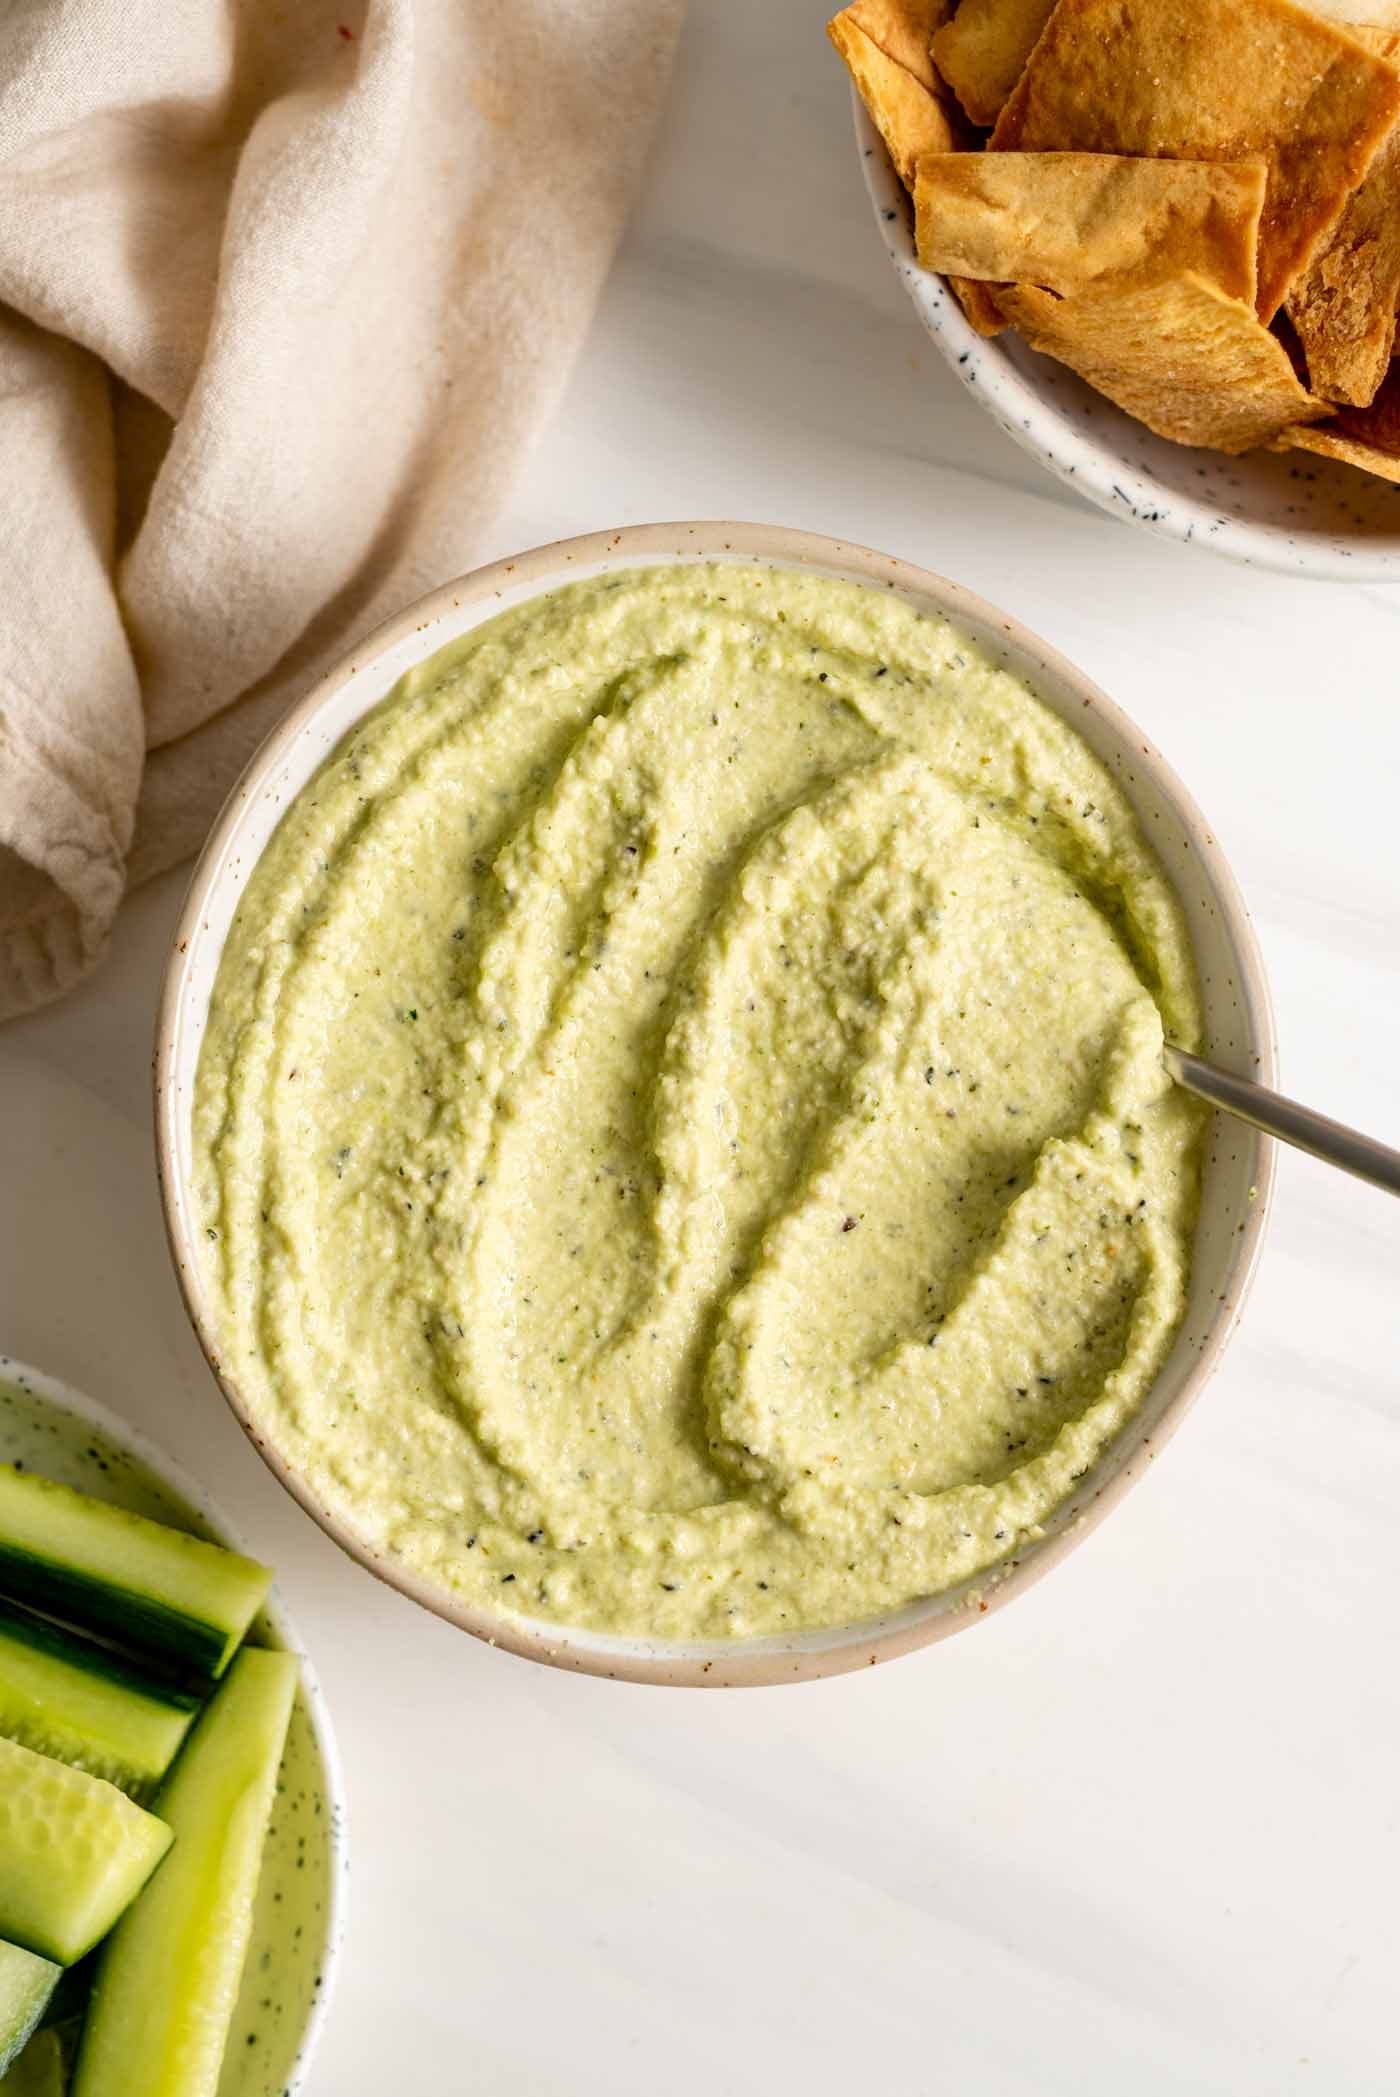 A bowl of green hummus with some chopped cucumber and pita chips.